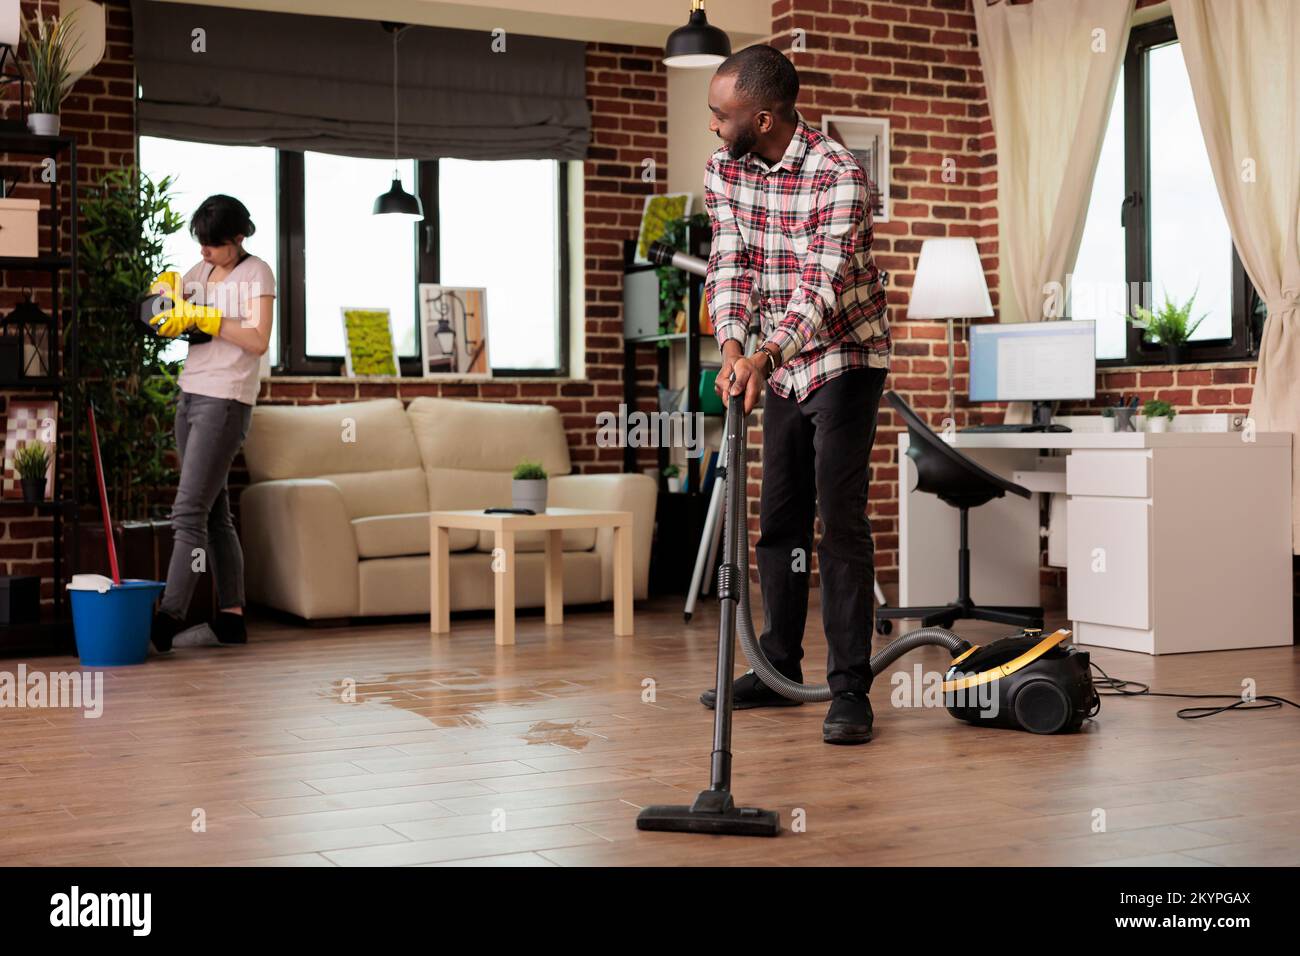 Happy african american man vacuuming floor while concentrated woman dusts decorative objects. Interracial couple cleaning home in harmony, doing household chores together. Stock Photo